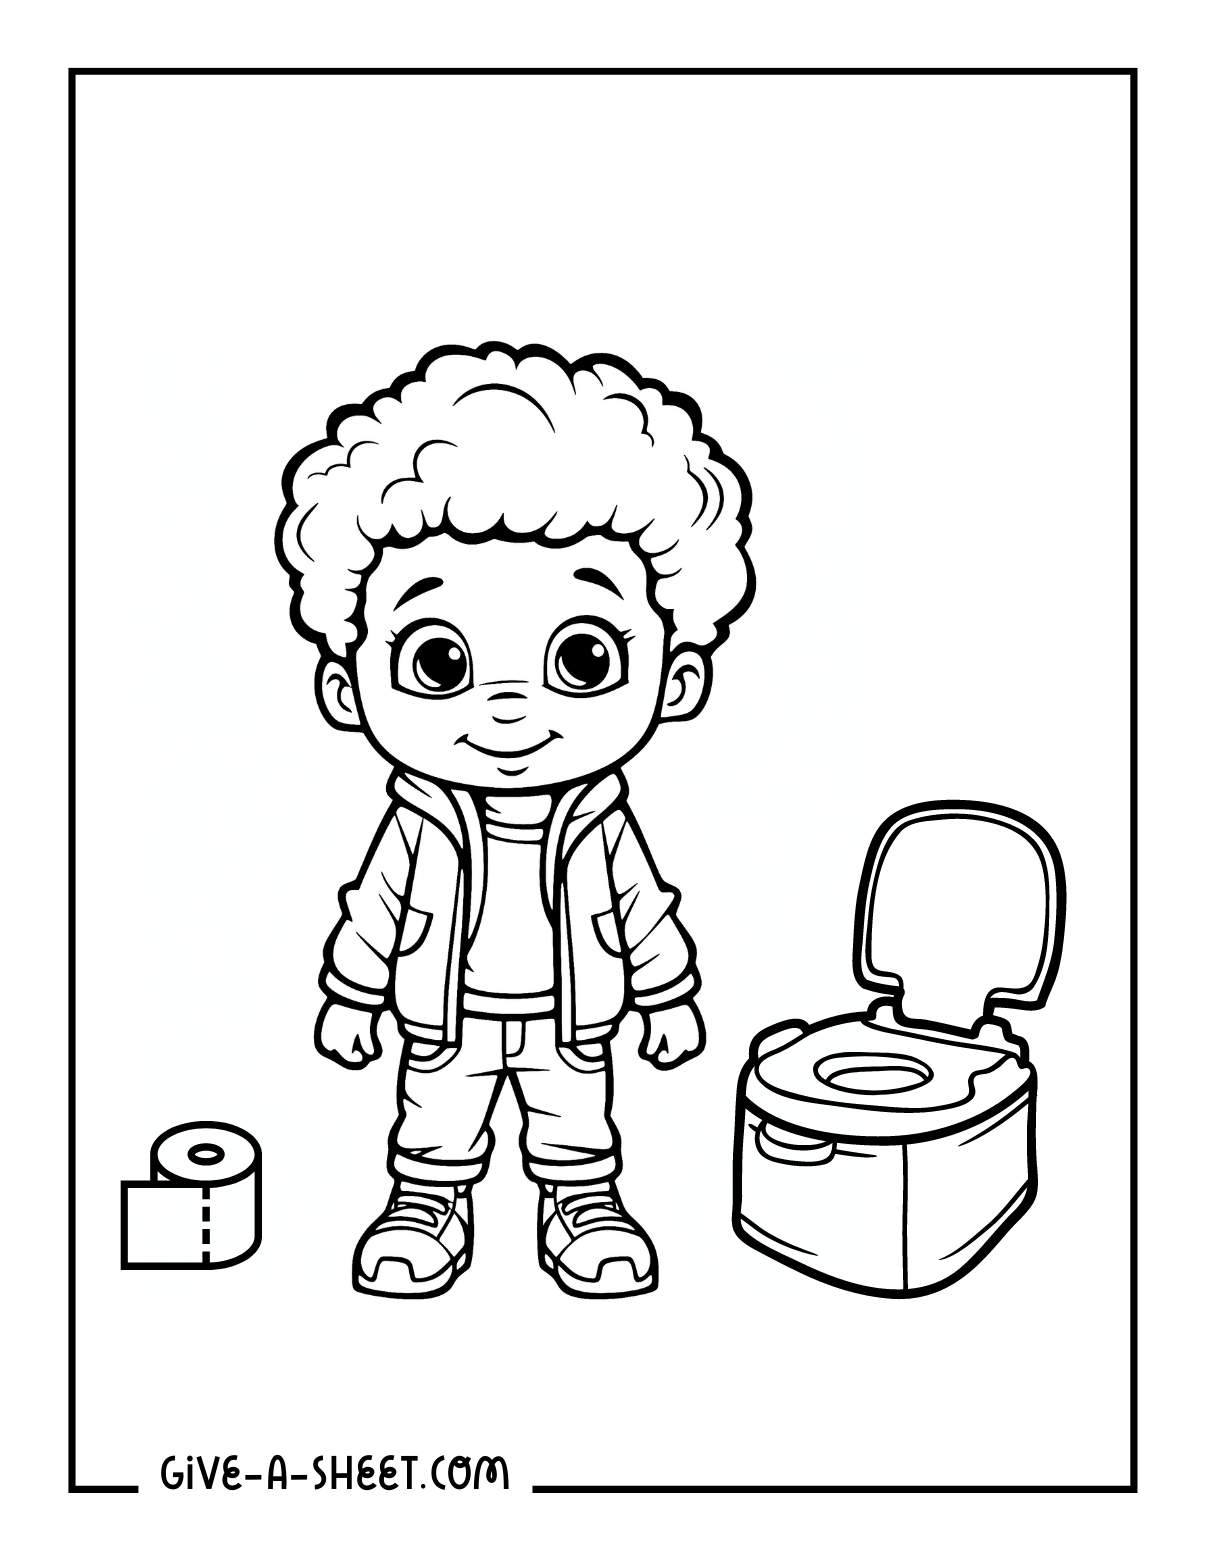 Potty training educational activity coloring sheets for kids.